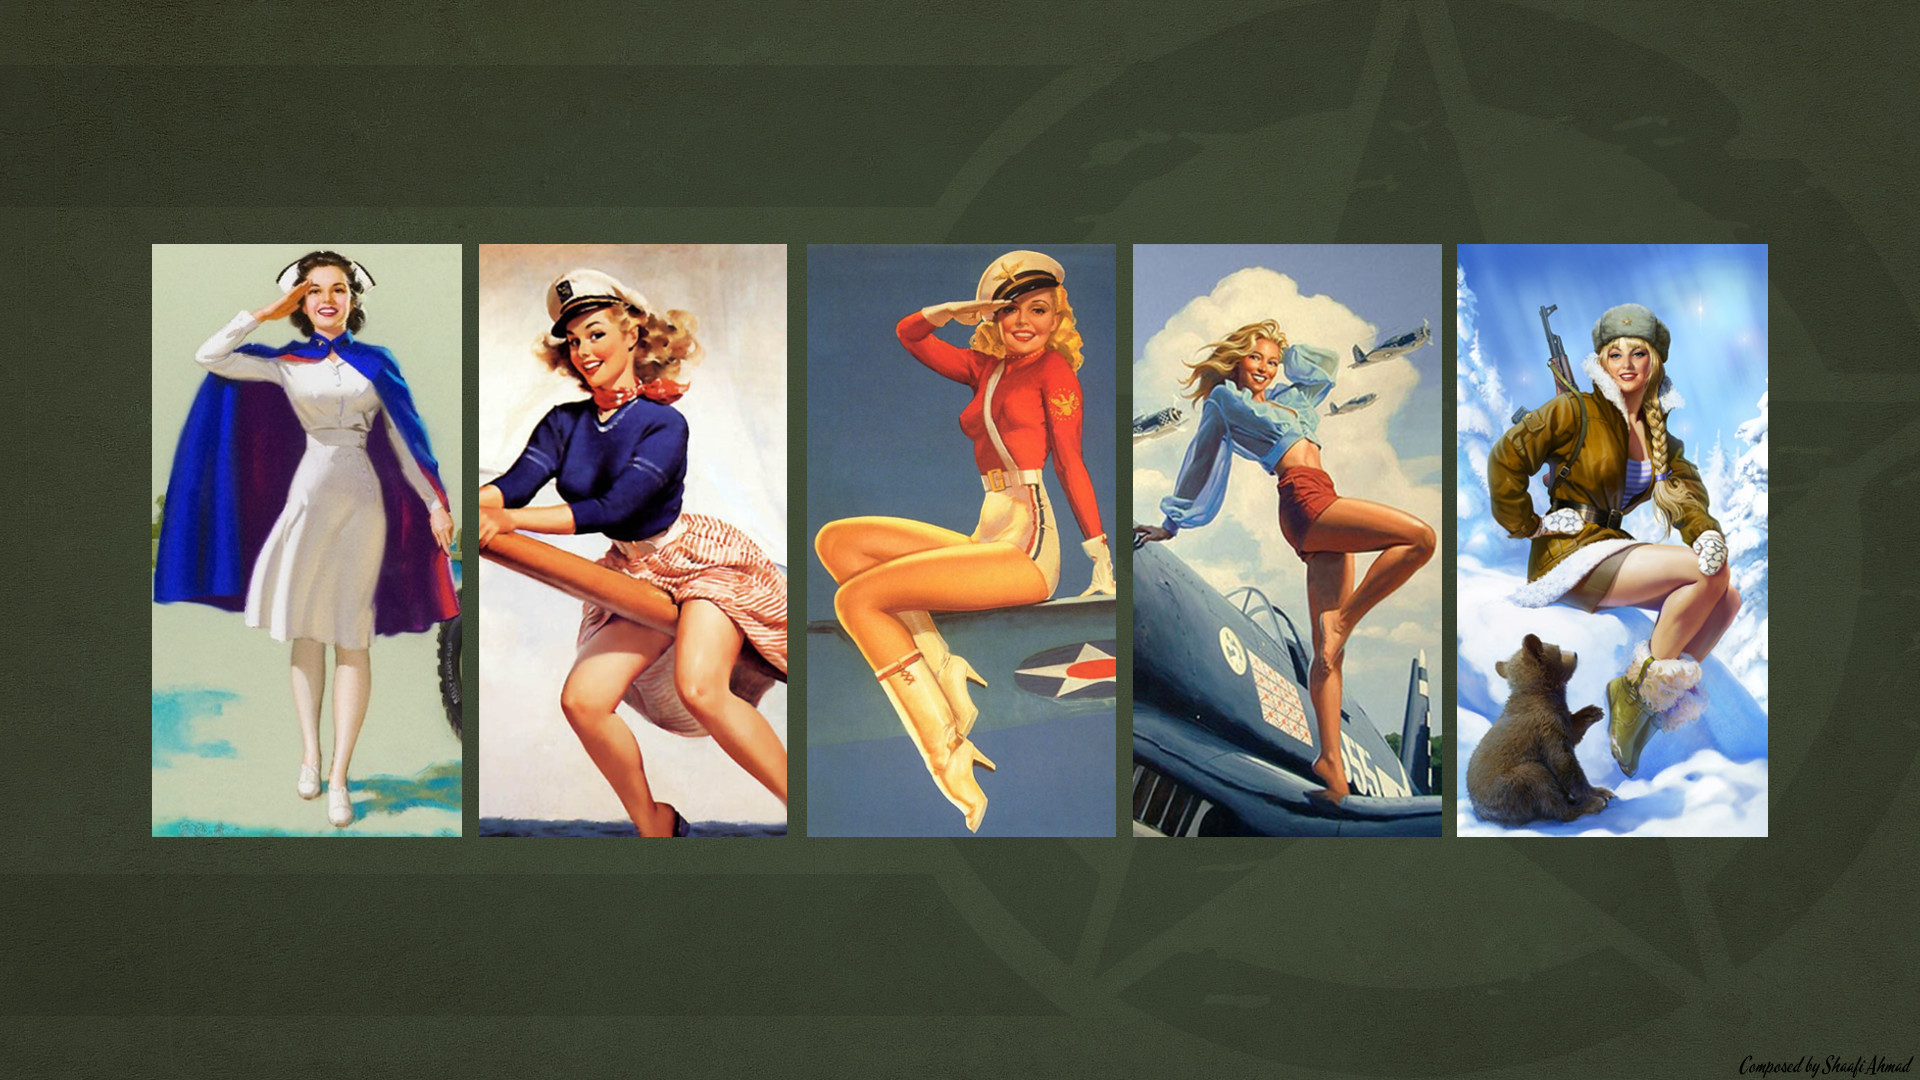 Army Themed Pin Up Wallpaper. 2 yrs Â· coolfield7 Â· r/Military